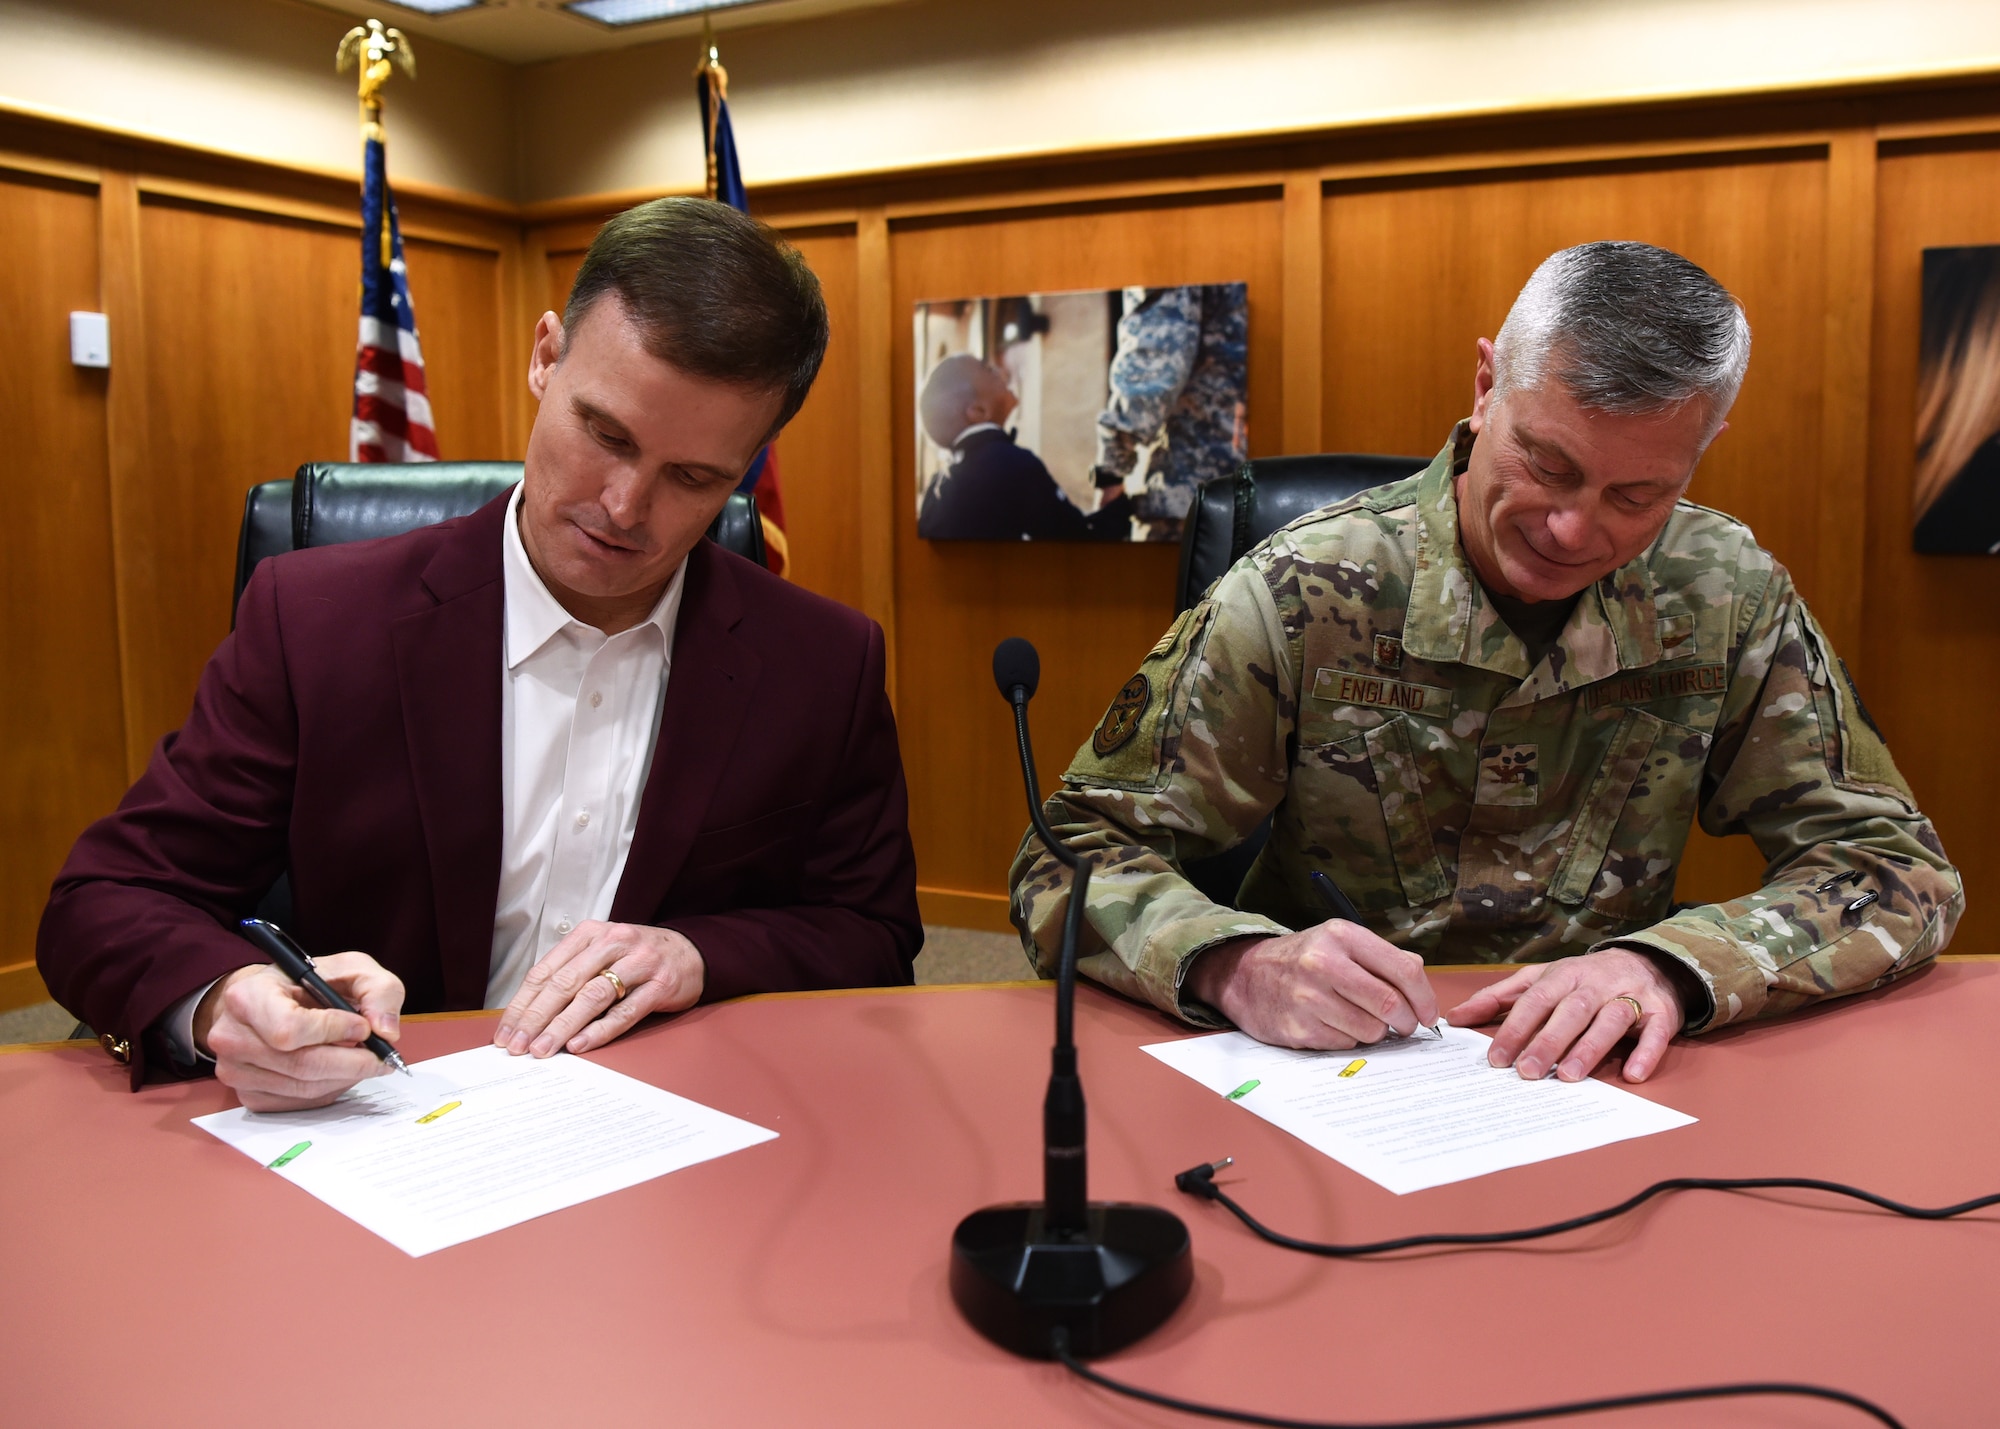 Superintendent of Schools Dr. Carl Dethloff and U.S. Air Force Col. Tony England, 17th Mission Support Group commander, sign a memorandum of agreement, manifesting the 17th Training Wing to provide vehicle mechanics and technicians with SAISD in exchange for SAISD to provide transportation, inside the SAISD Administration Building, in San Angelo, Texas, Feb. 21, 2020. Two years in the making, the MOA was reached as part of the Goodfellow Community Partnership Initiate, which enhances trust and support between GAFB and the local community through partnership opportunities. (U.S. Air Force photo by Airman 1st Class Abbey Rieves)